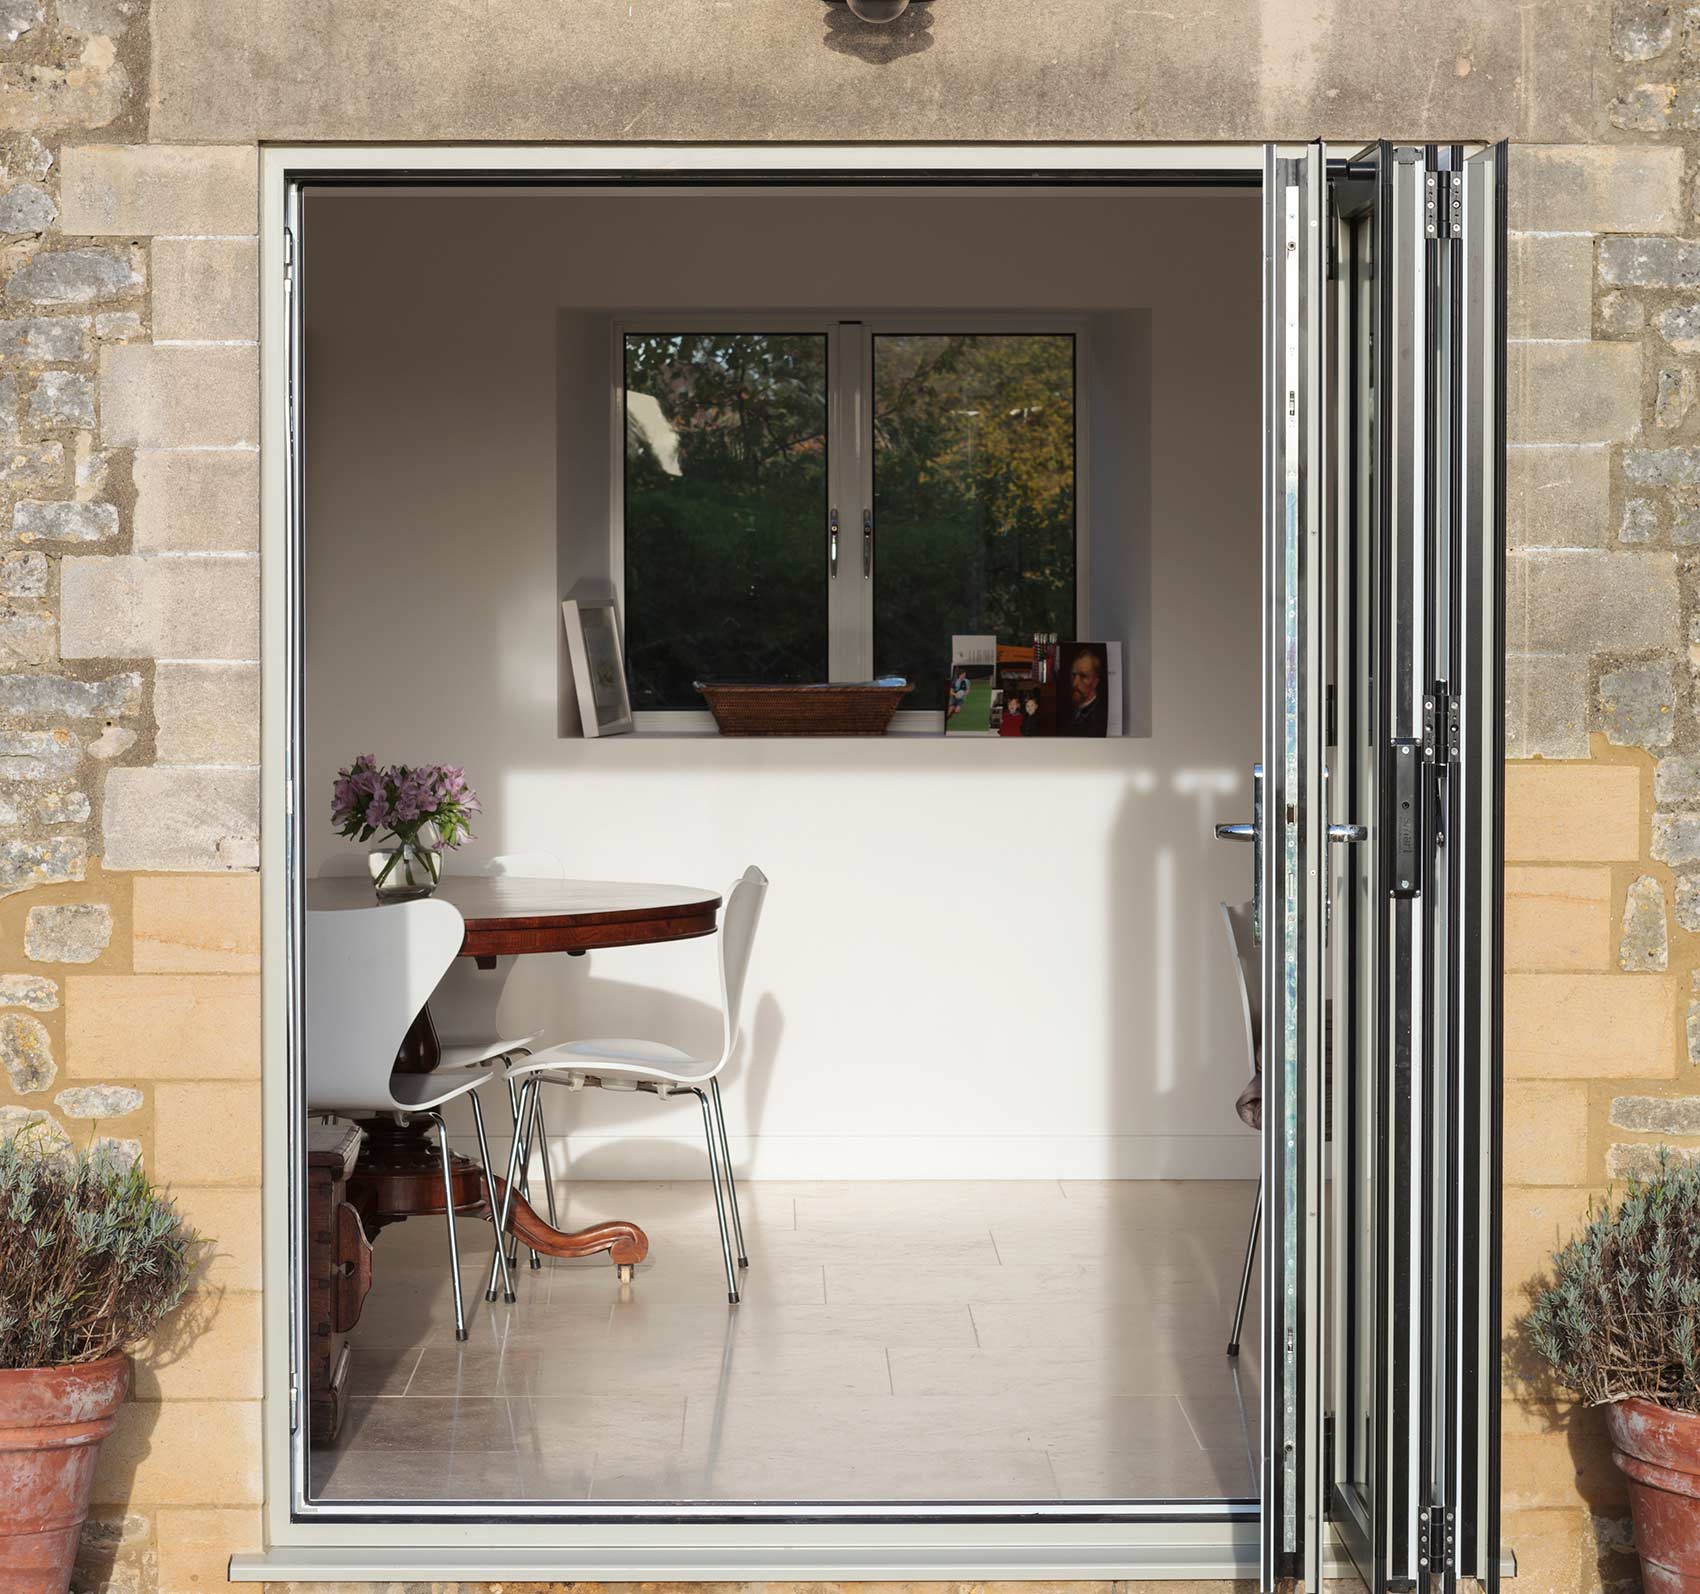 How Does Double Glazing Reduce Heat Loss